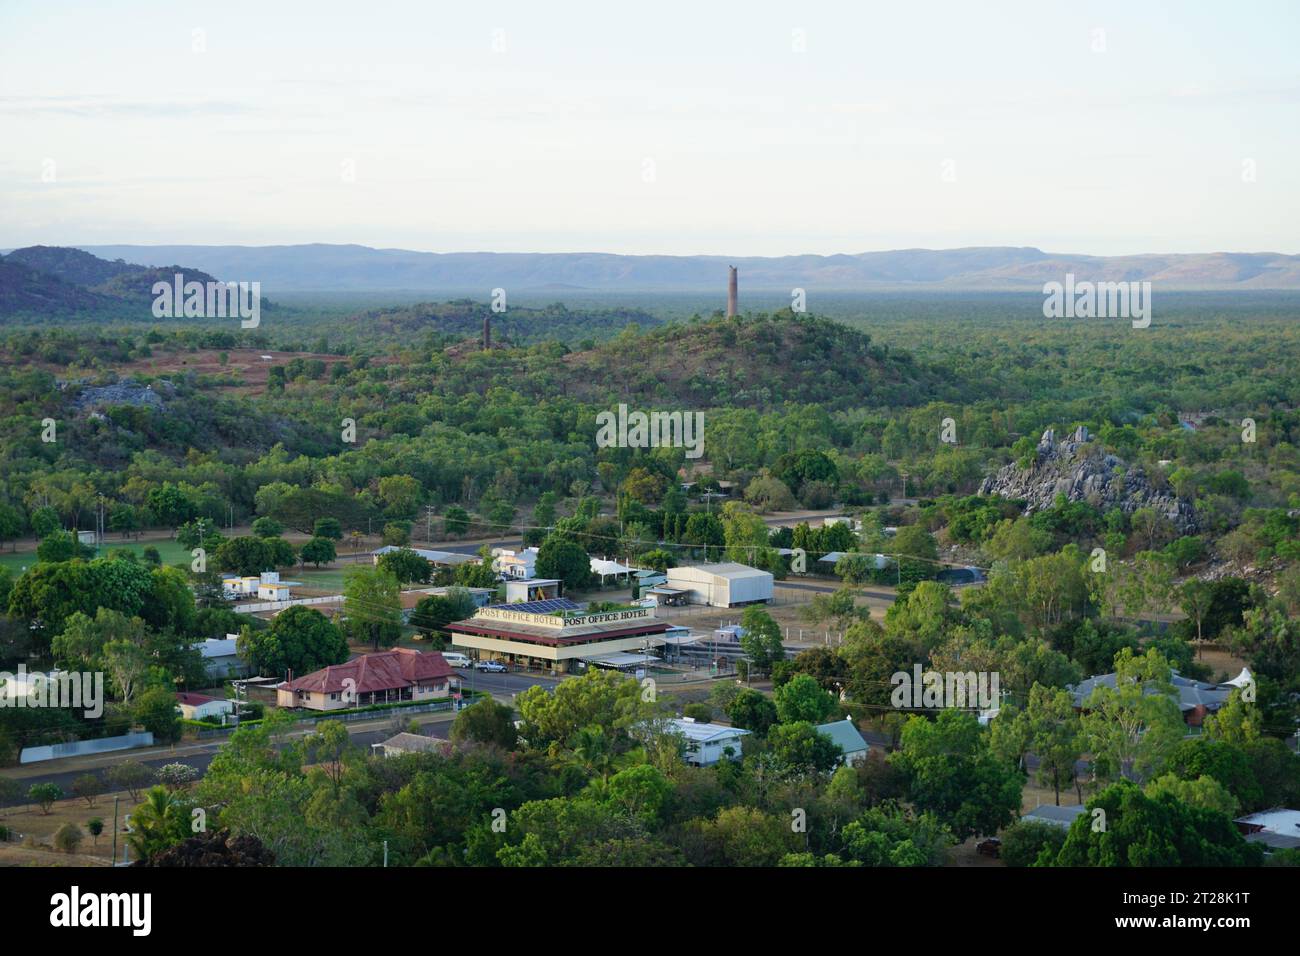 Lookout birdseye view over outback town Chillagoe, Chillagoe - Mungana Caves National Park, Chillagoe, Queensland, Australia Stock Photo